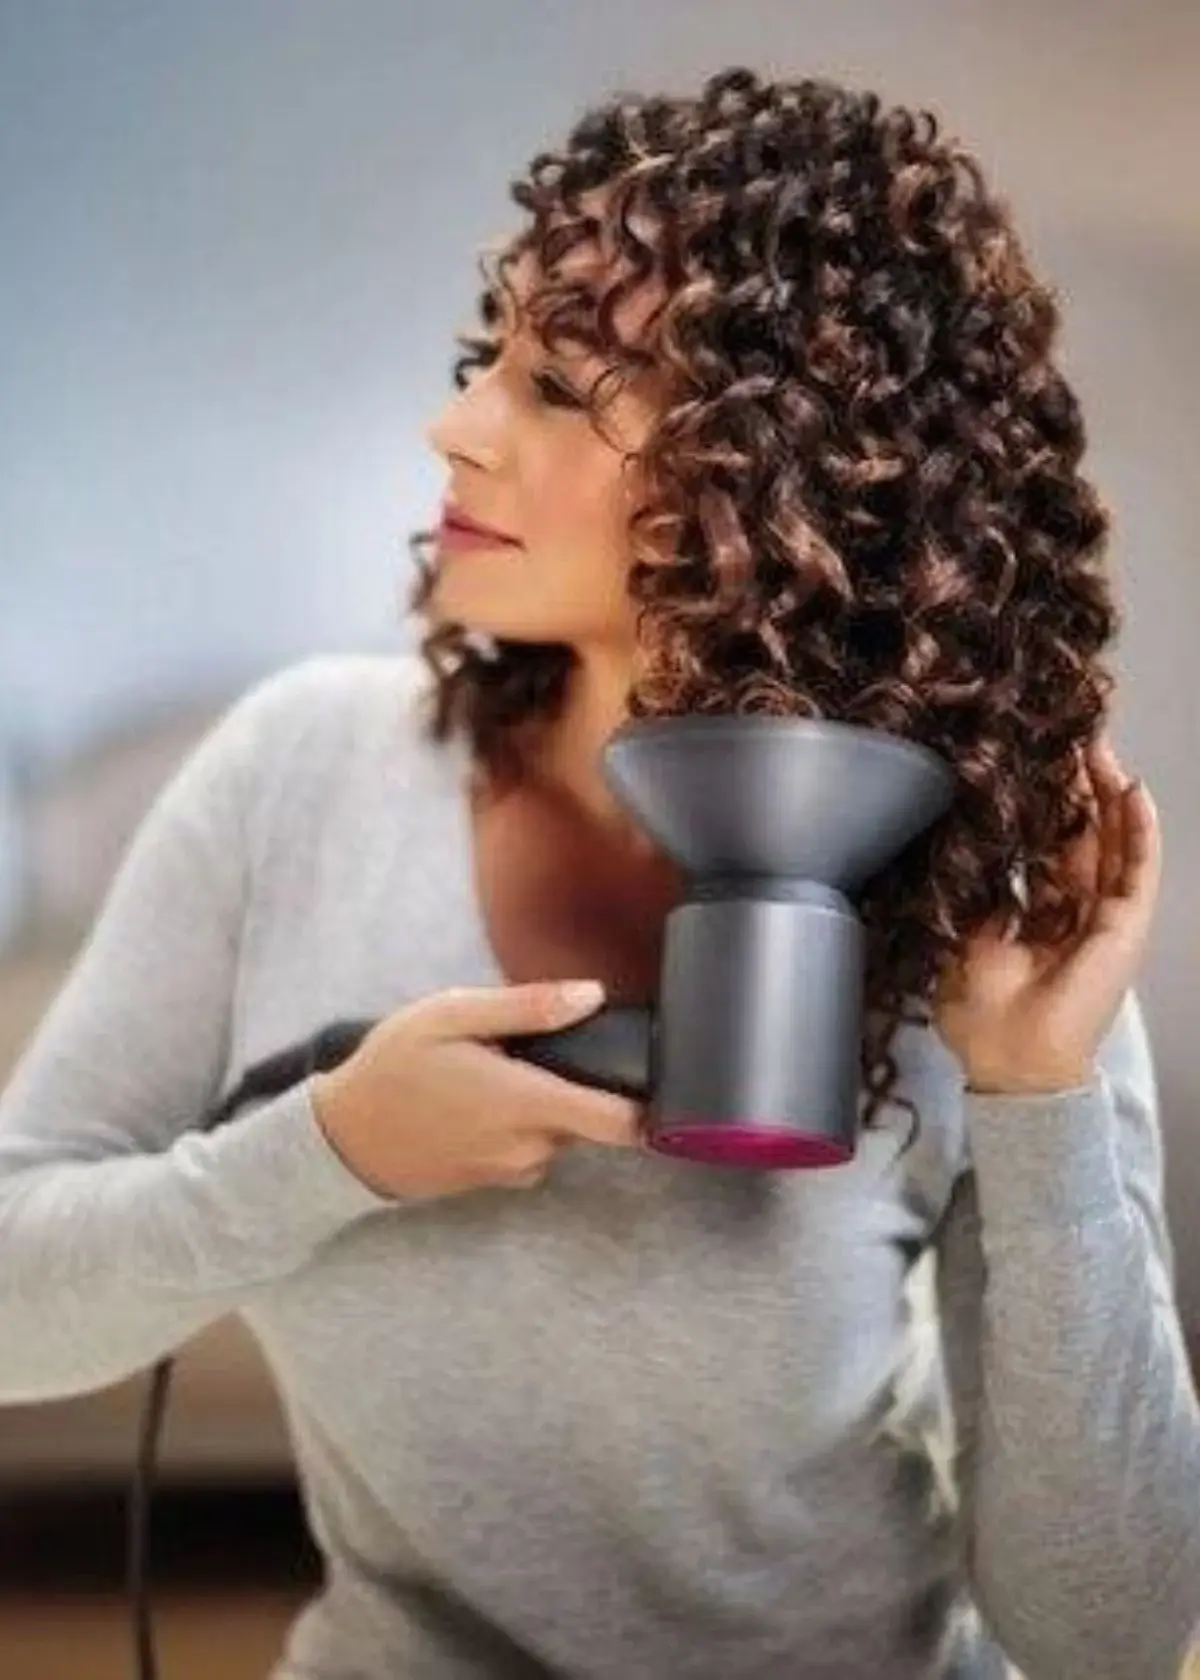 How to choose the right blow dryer for curly hair?